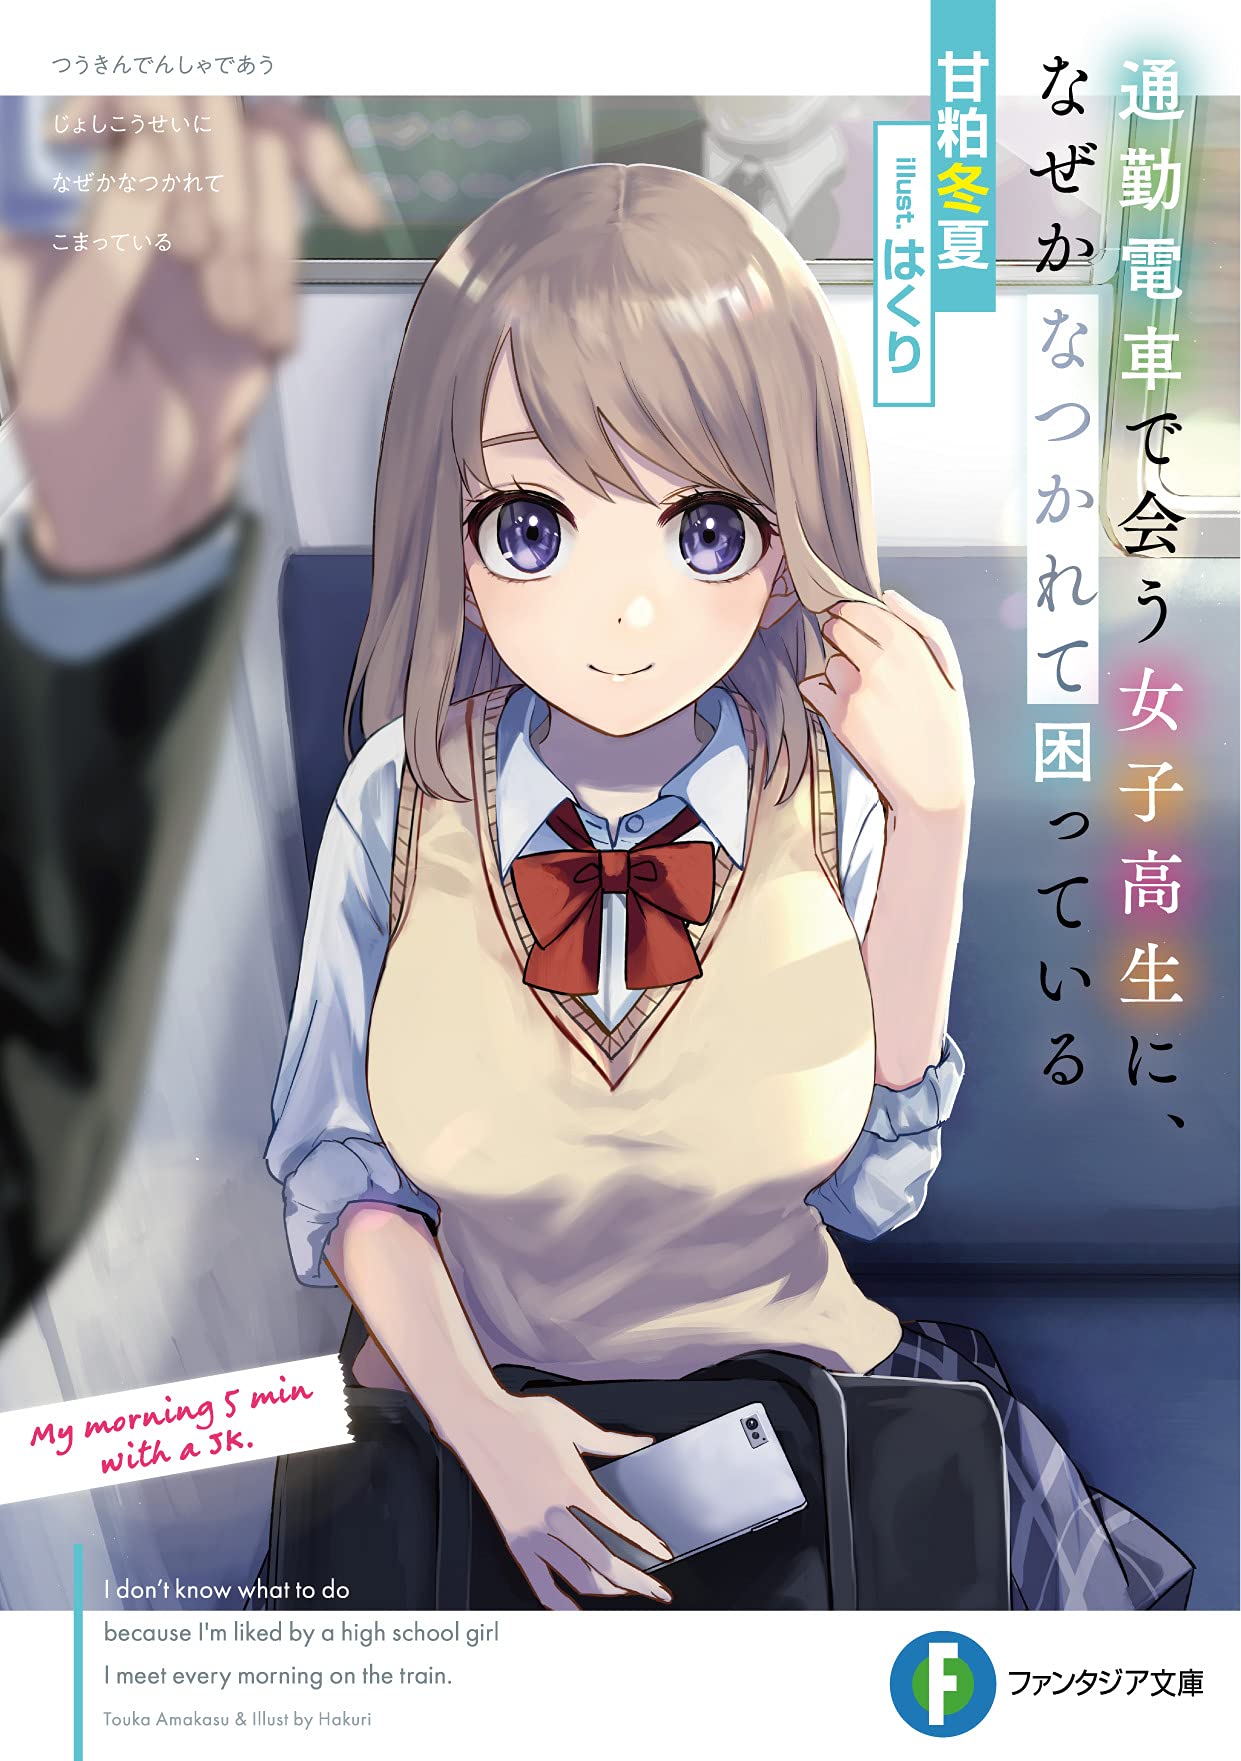 I'm Having Trouble With a High School Girl I Meet on the Commuter Train Who  for Some Reason Has Taken a Liking to Me - Novel Updates